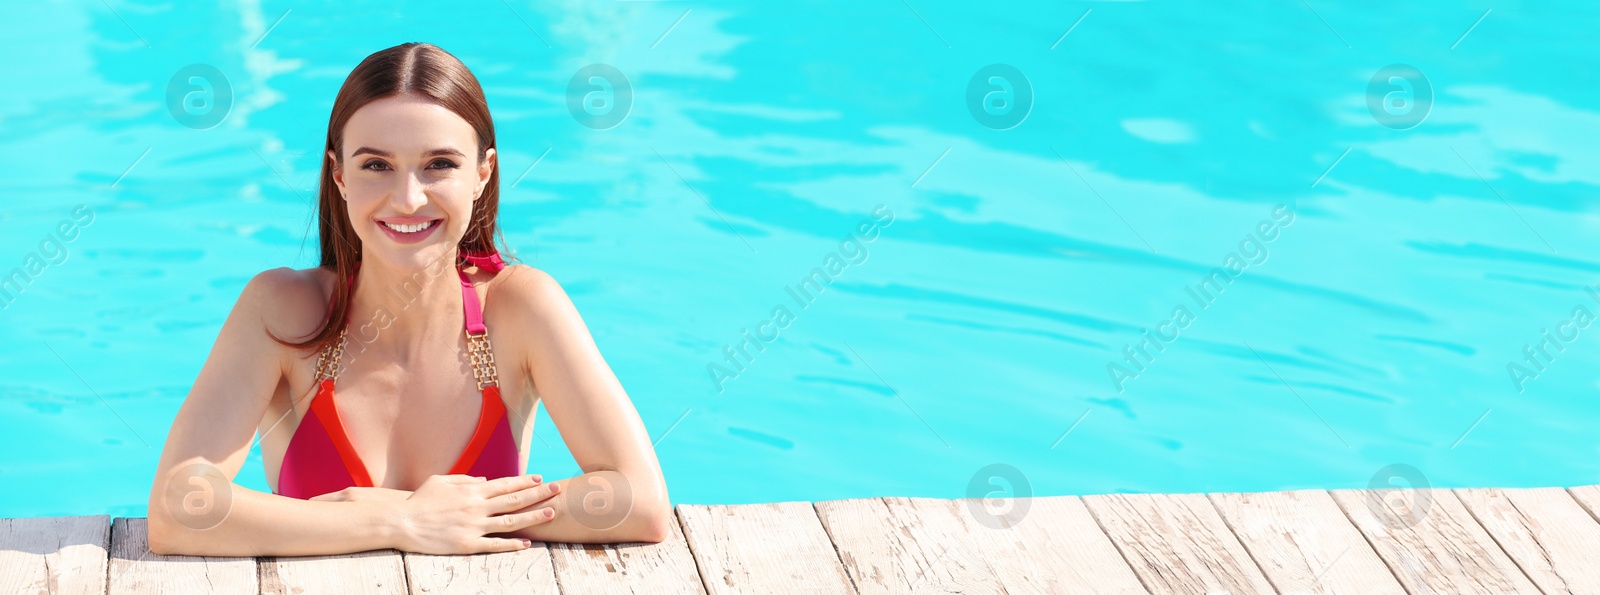 Image of Beautiful young woman in swimming pool on sunny day, space for text. Banner design